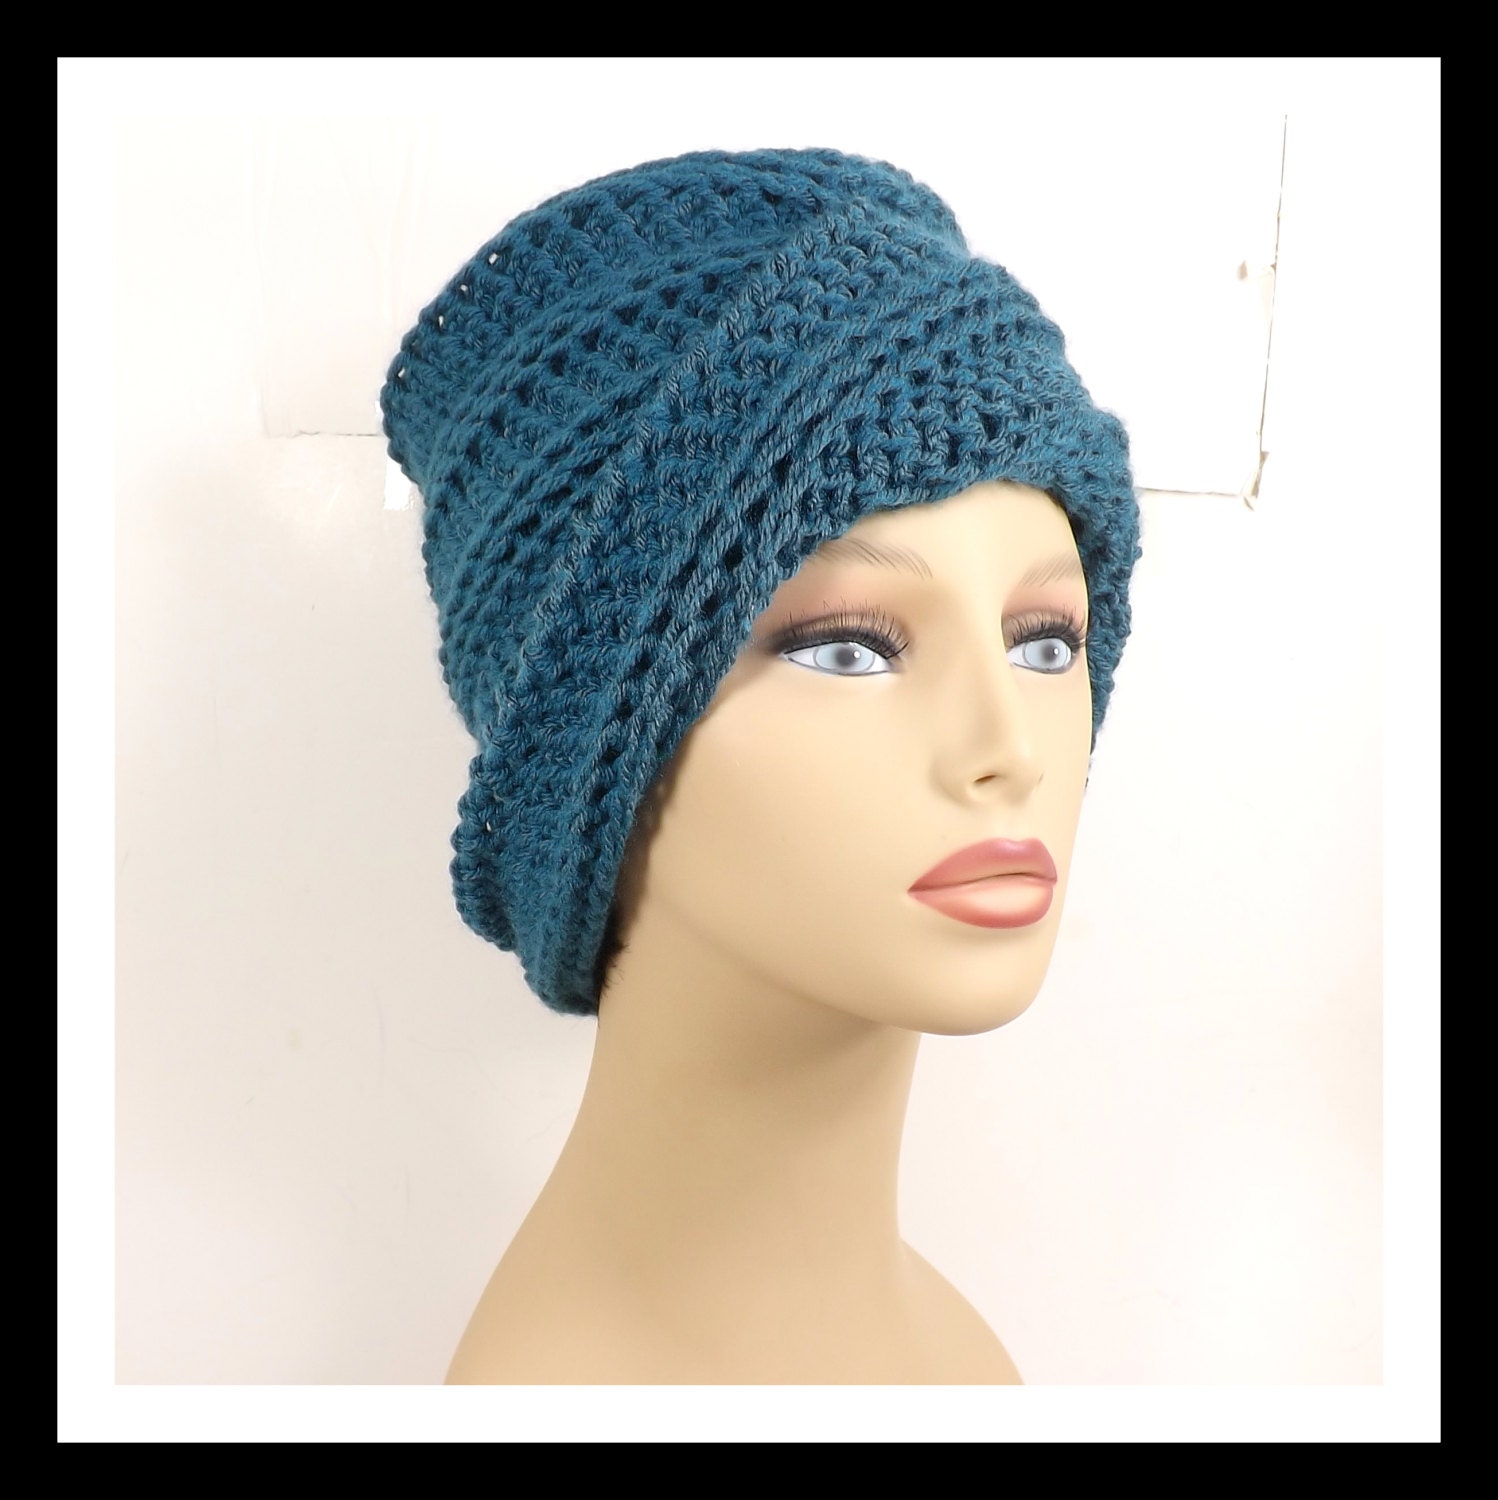 Unique Etsy Crochet and Knit Hats and Patterns Blog by Strawberry